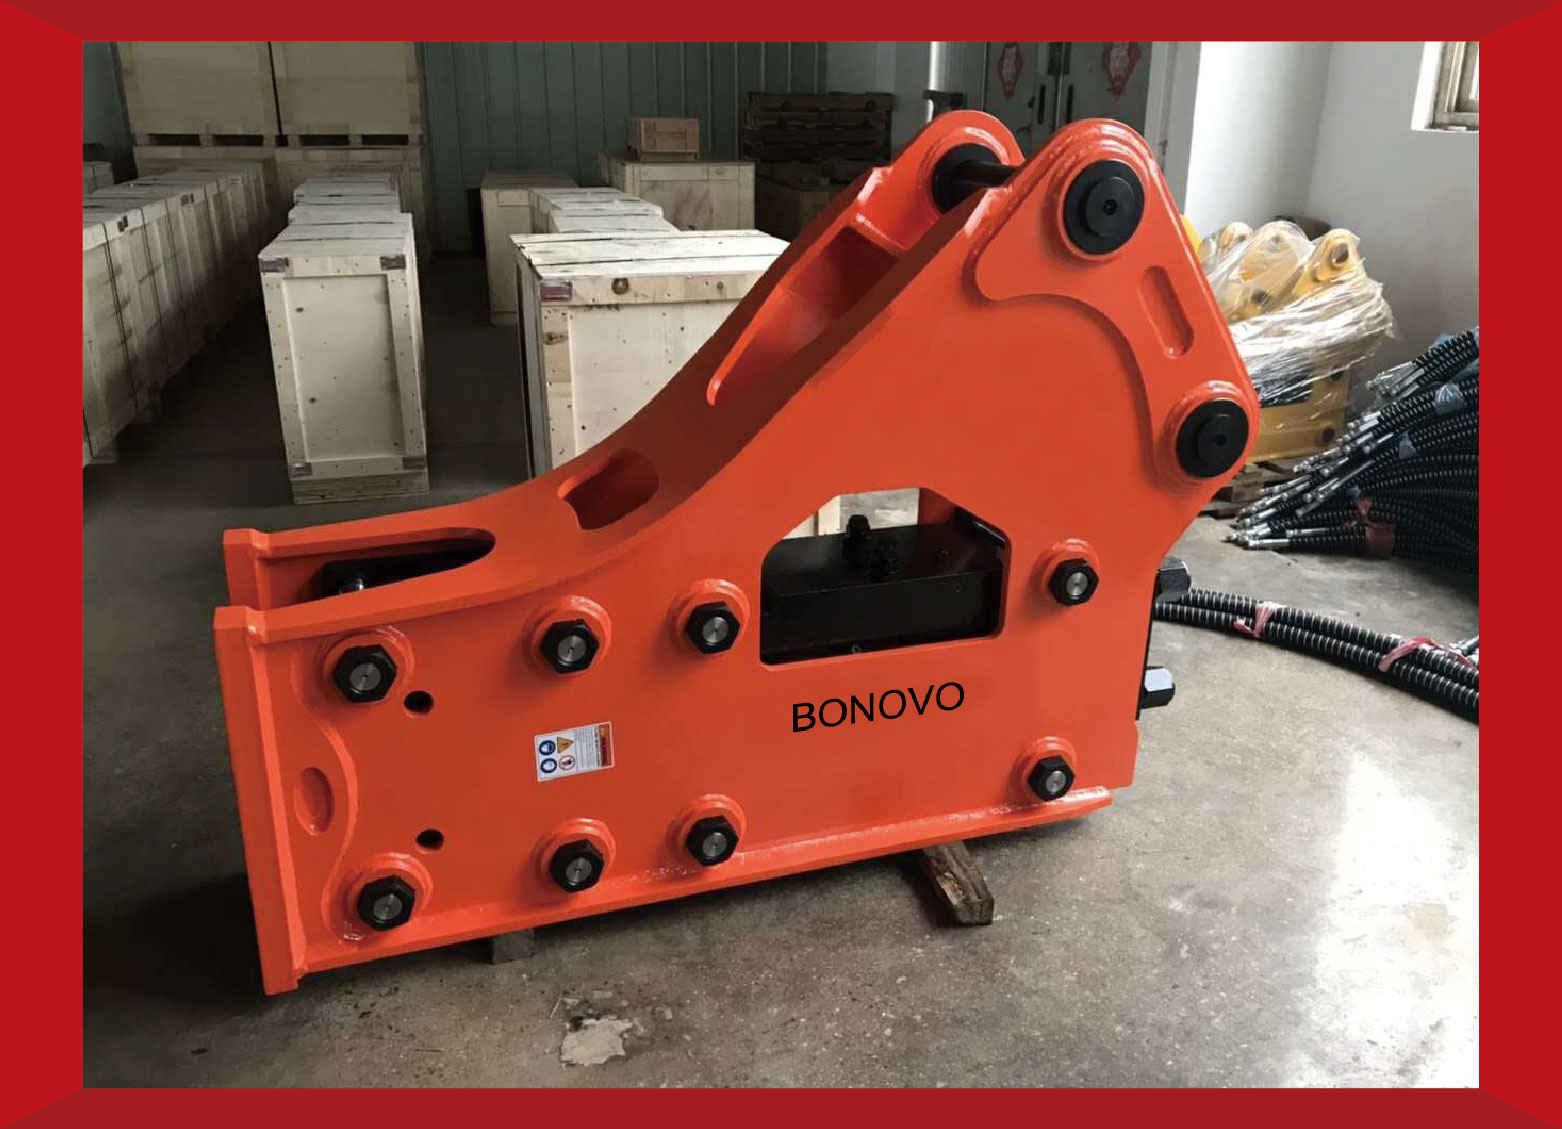 Manufacturing Companies for Trackhoe With Thumb - Bonovo China Side breaker Excavator Hydraulic Breaker Hammer for various excavator types - Bonovo - Bonovo